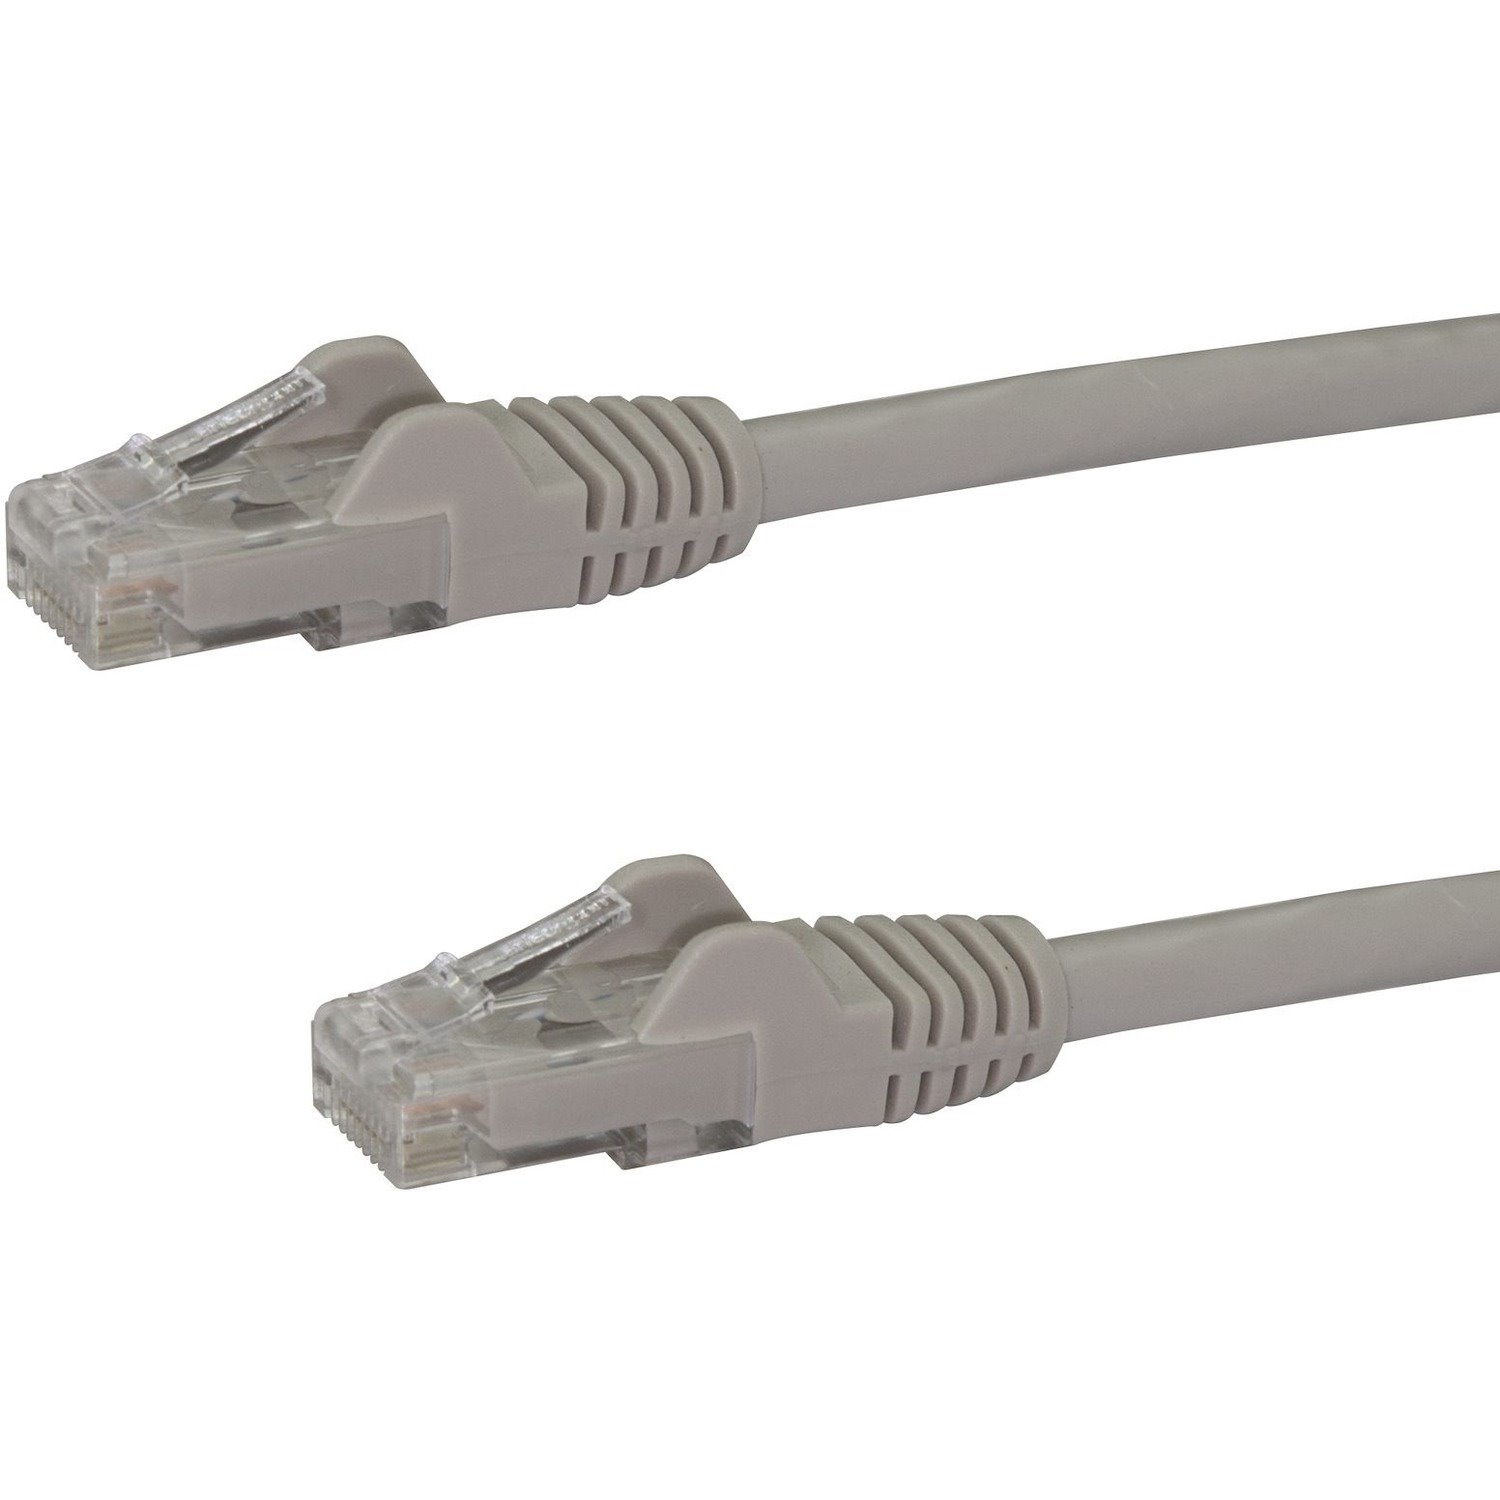 StarTech.com 5m CAT6 Ethernet Cable - Grey Snagless Gigabit - 100W PoE UTP 650MHz Category 6 Patch Cord UL Certified Wiring/TIA